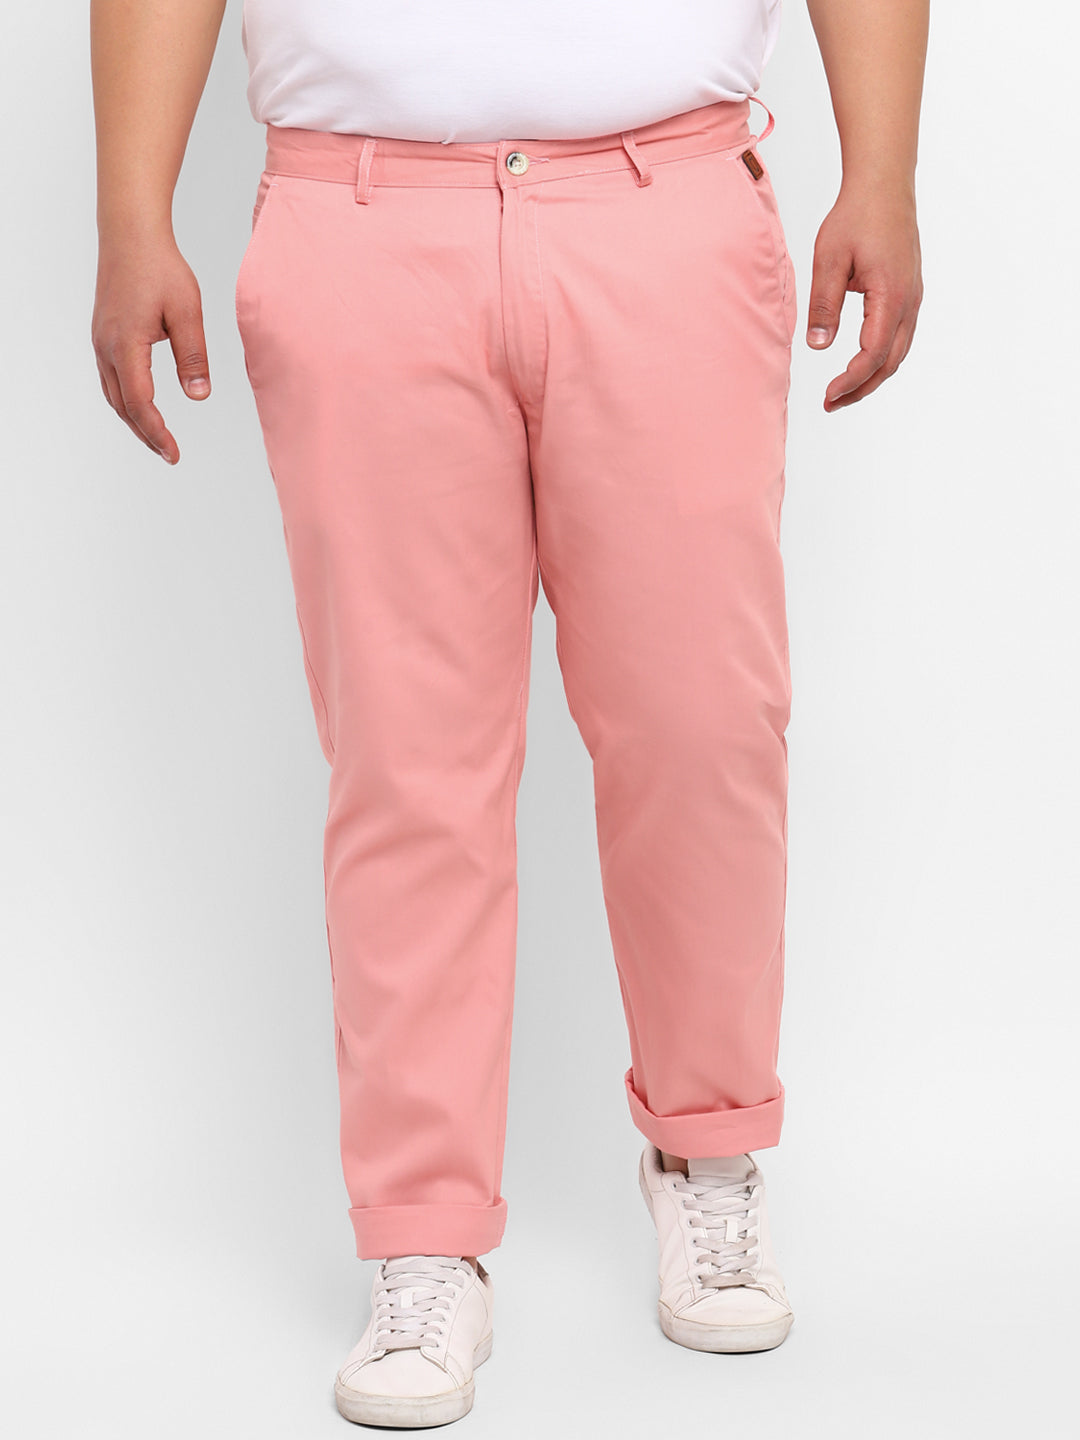 Plus Men's Pink Cotton Light Weight Non-Stretch Regular Fit Casual Trousers